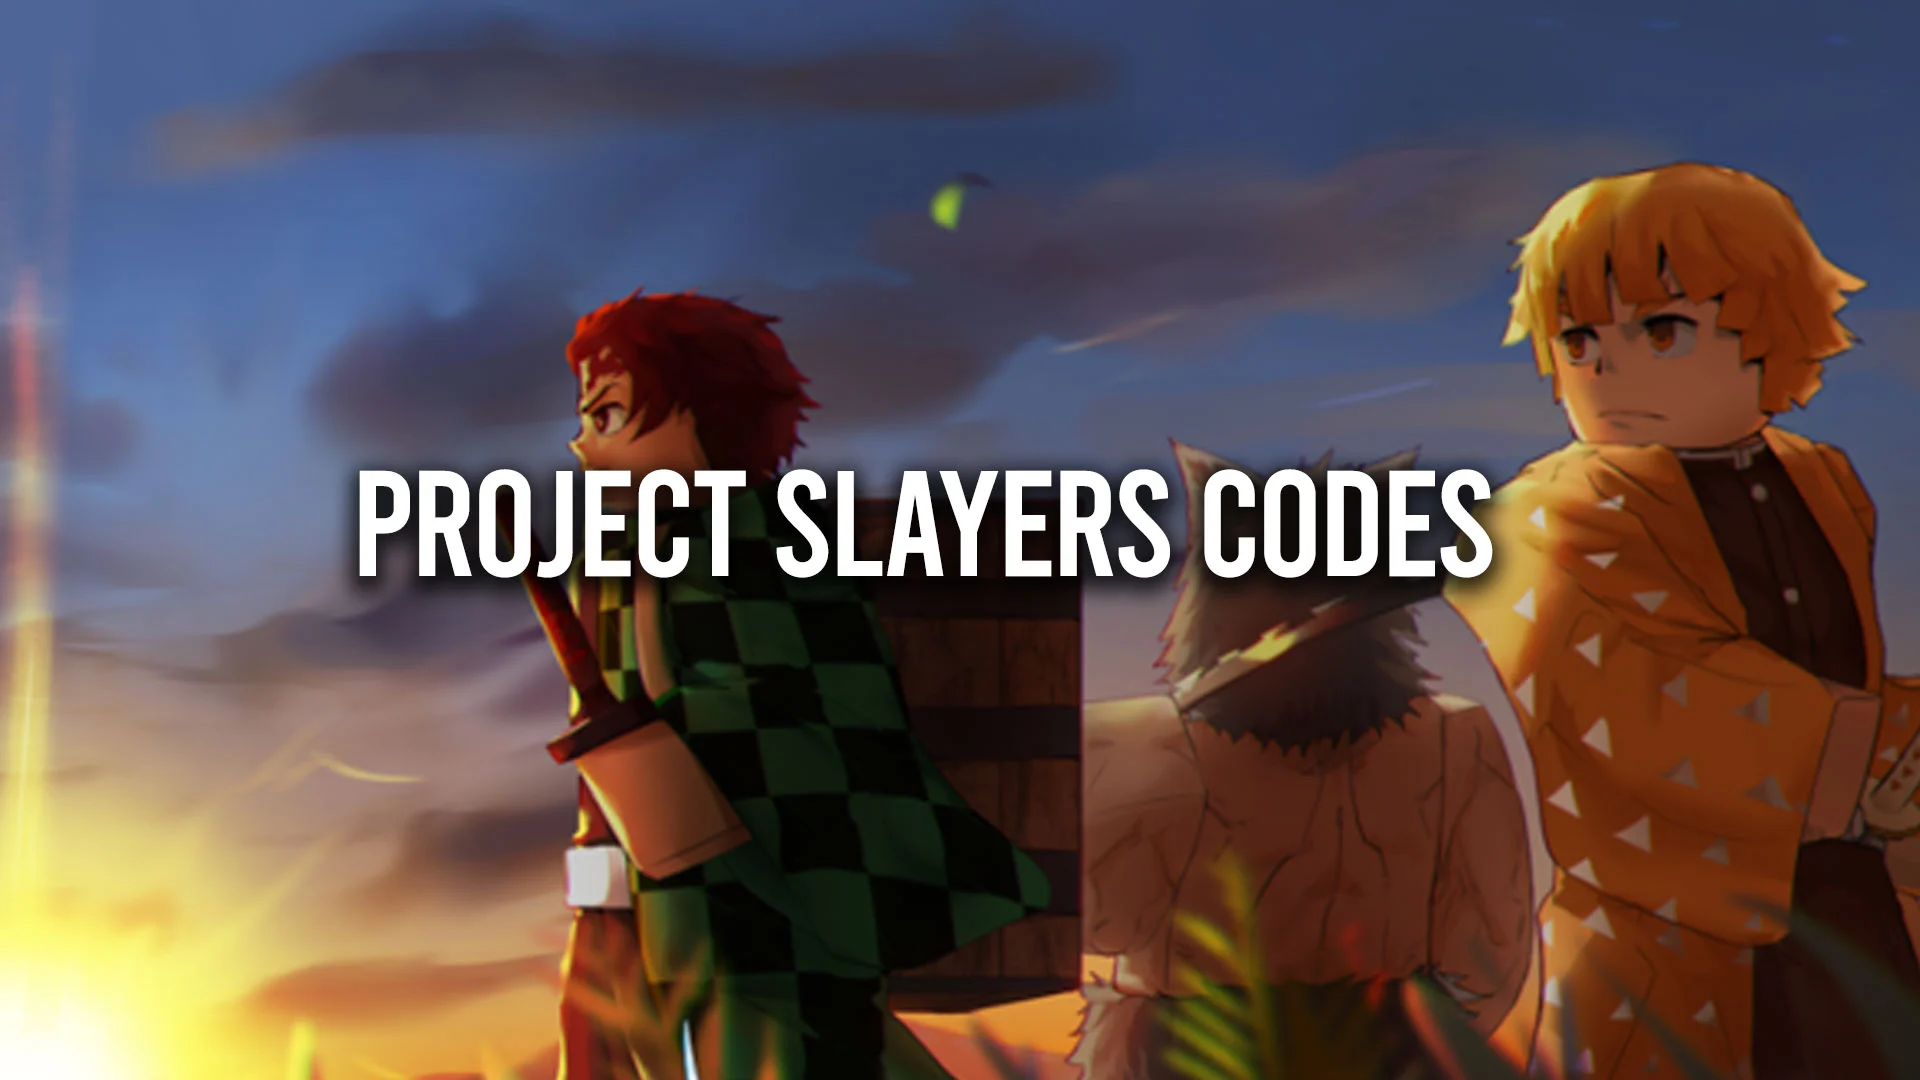 Giving Away Free Project Slayers code everday #projectslayers #private